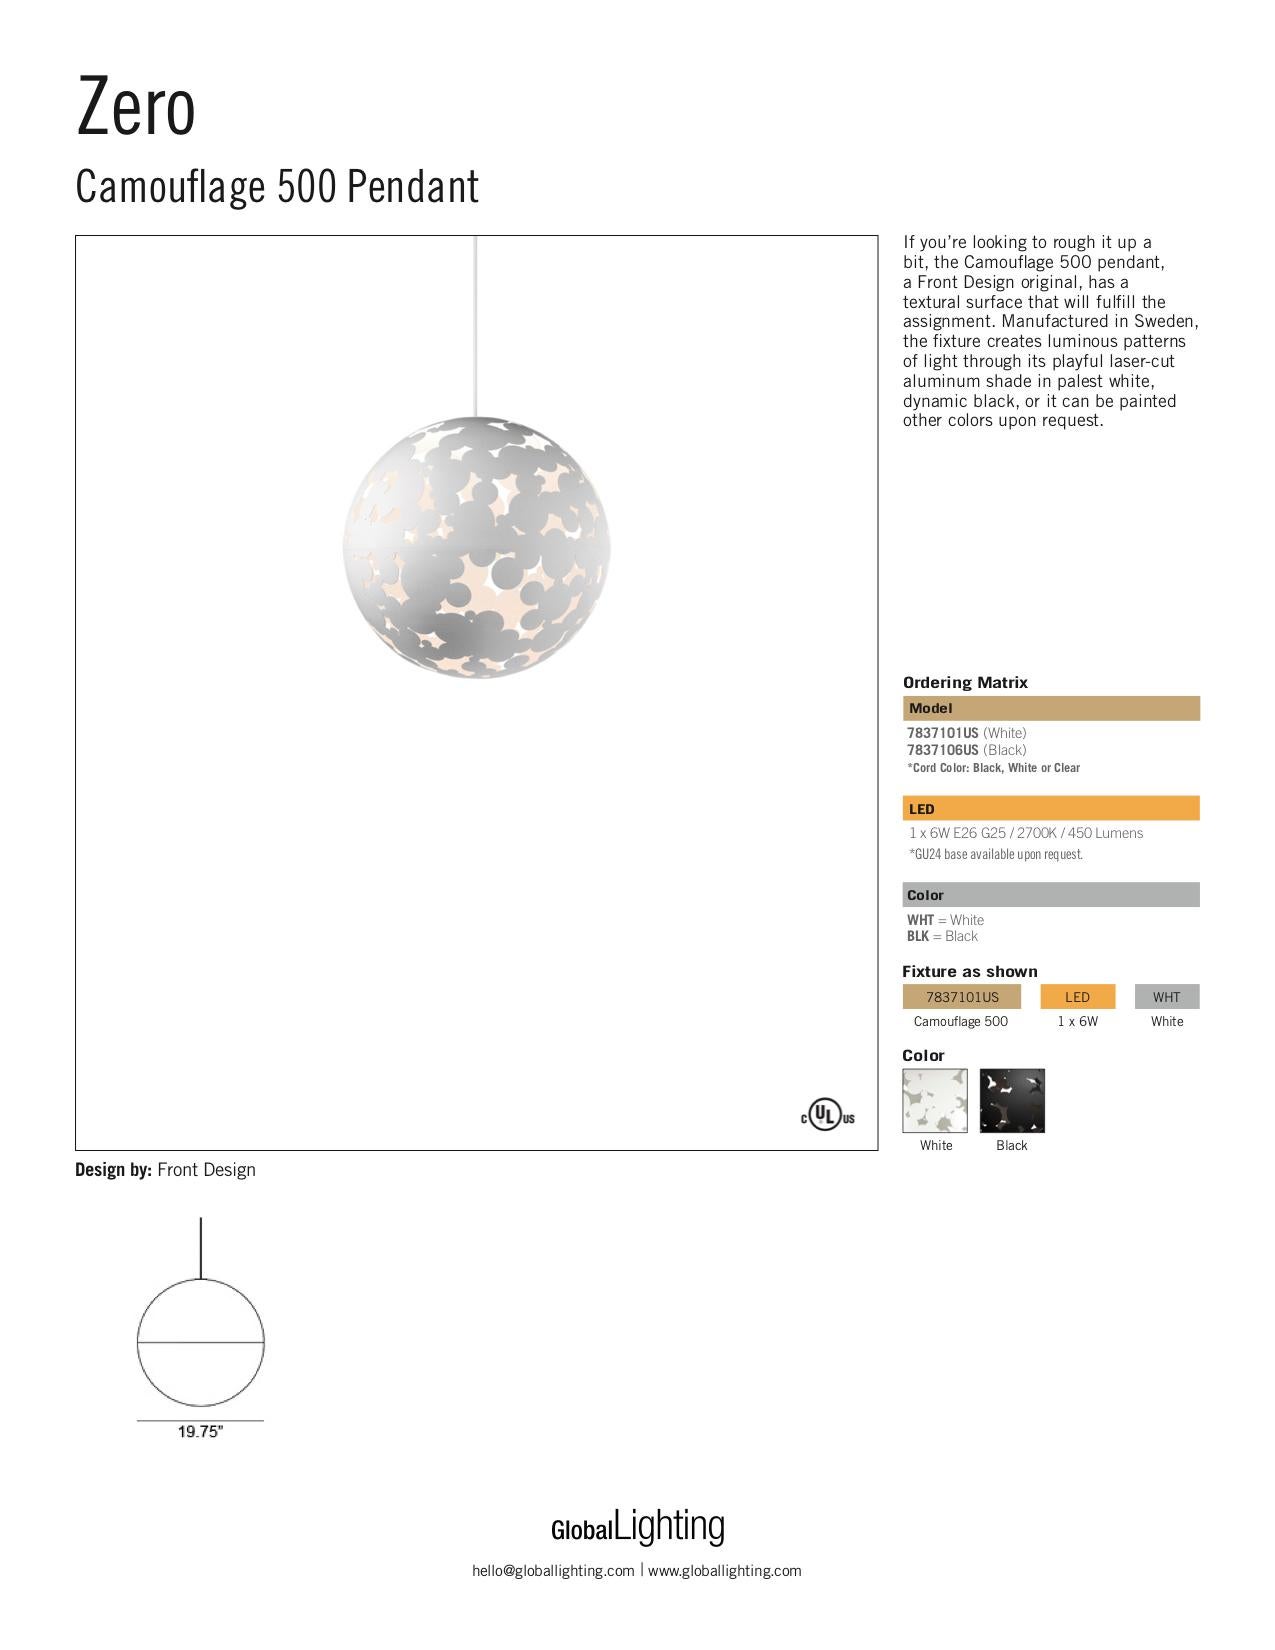 Swedish Zero Camouflage 500 Pendant in White by Front Design - 1stdibs New York For Sale